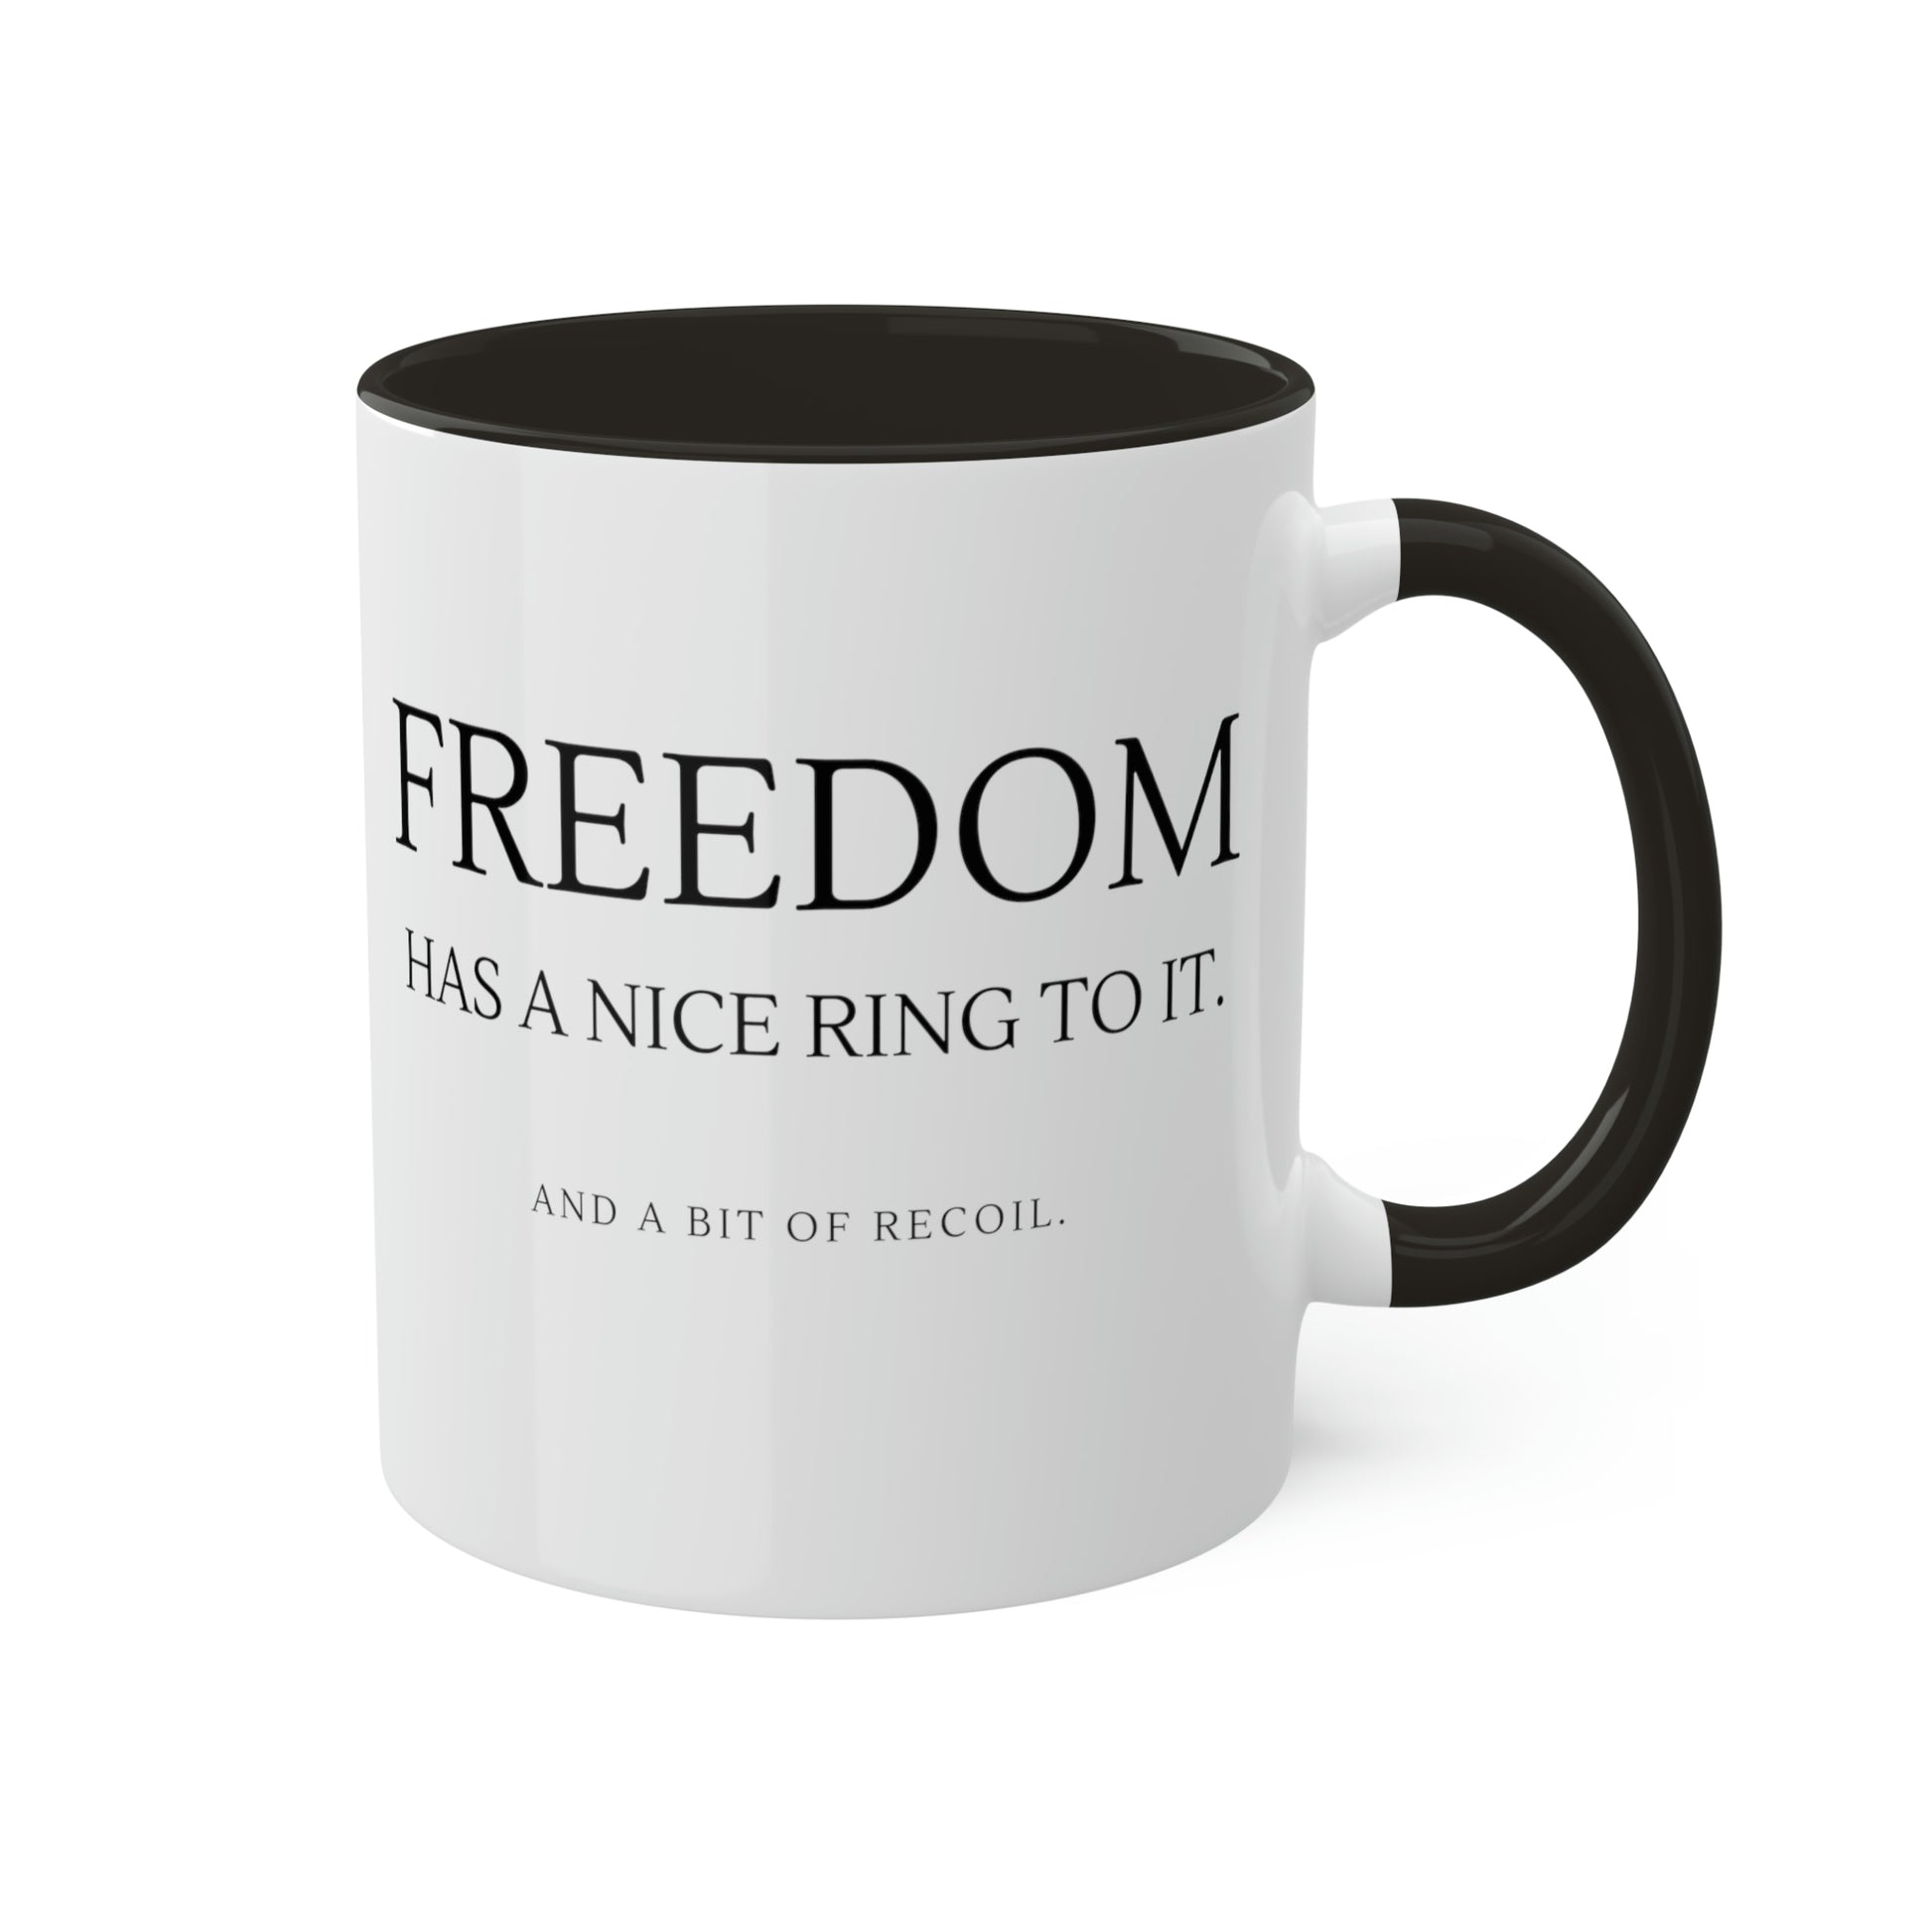 freedom-has-a-nice-ring-to-it-and-a-bit-of-recoil-glossy-mug-11-oz-2a-right-side